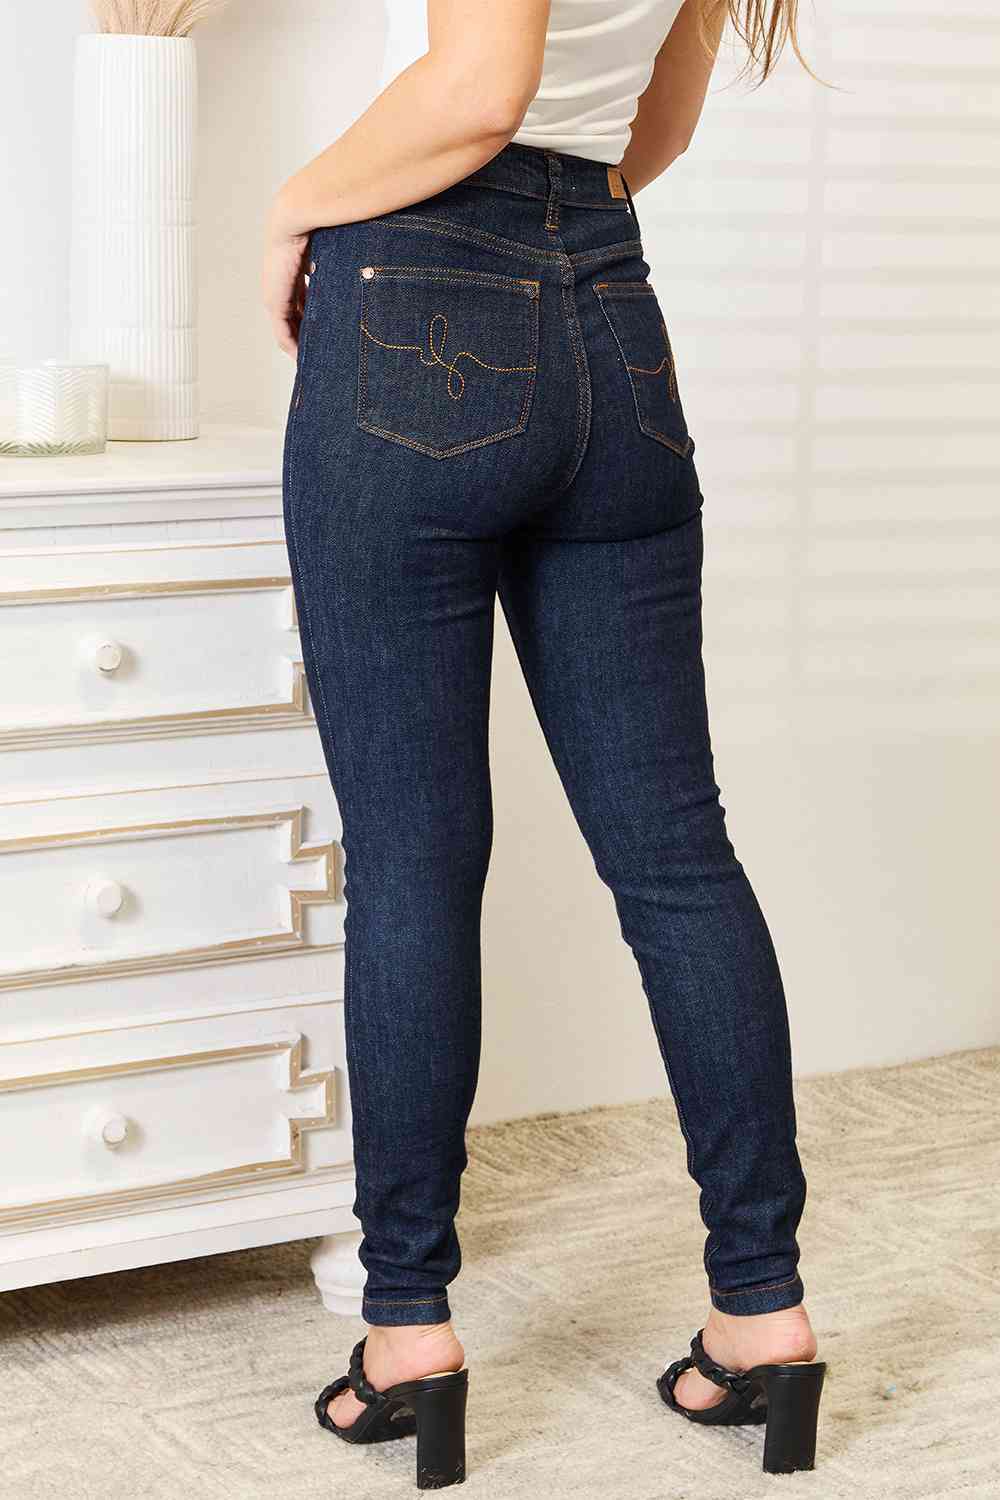 Back View, Judy Blue, High Waist Classic Back Pocket Embroidery Skinny Jeans Style 88683